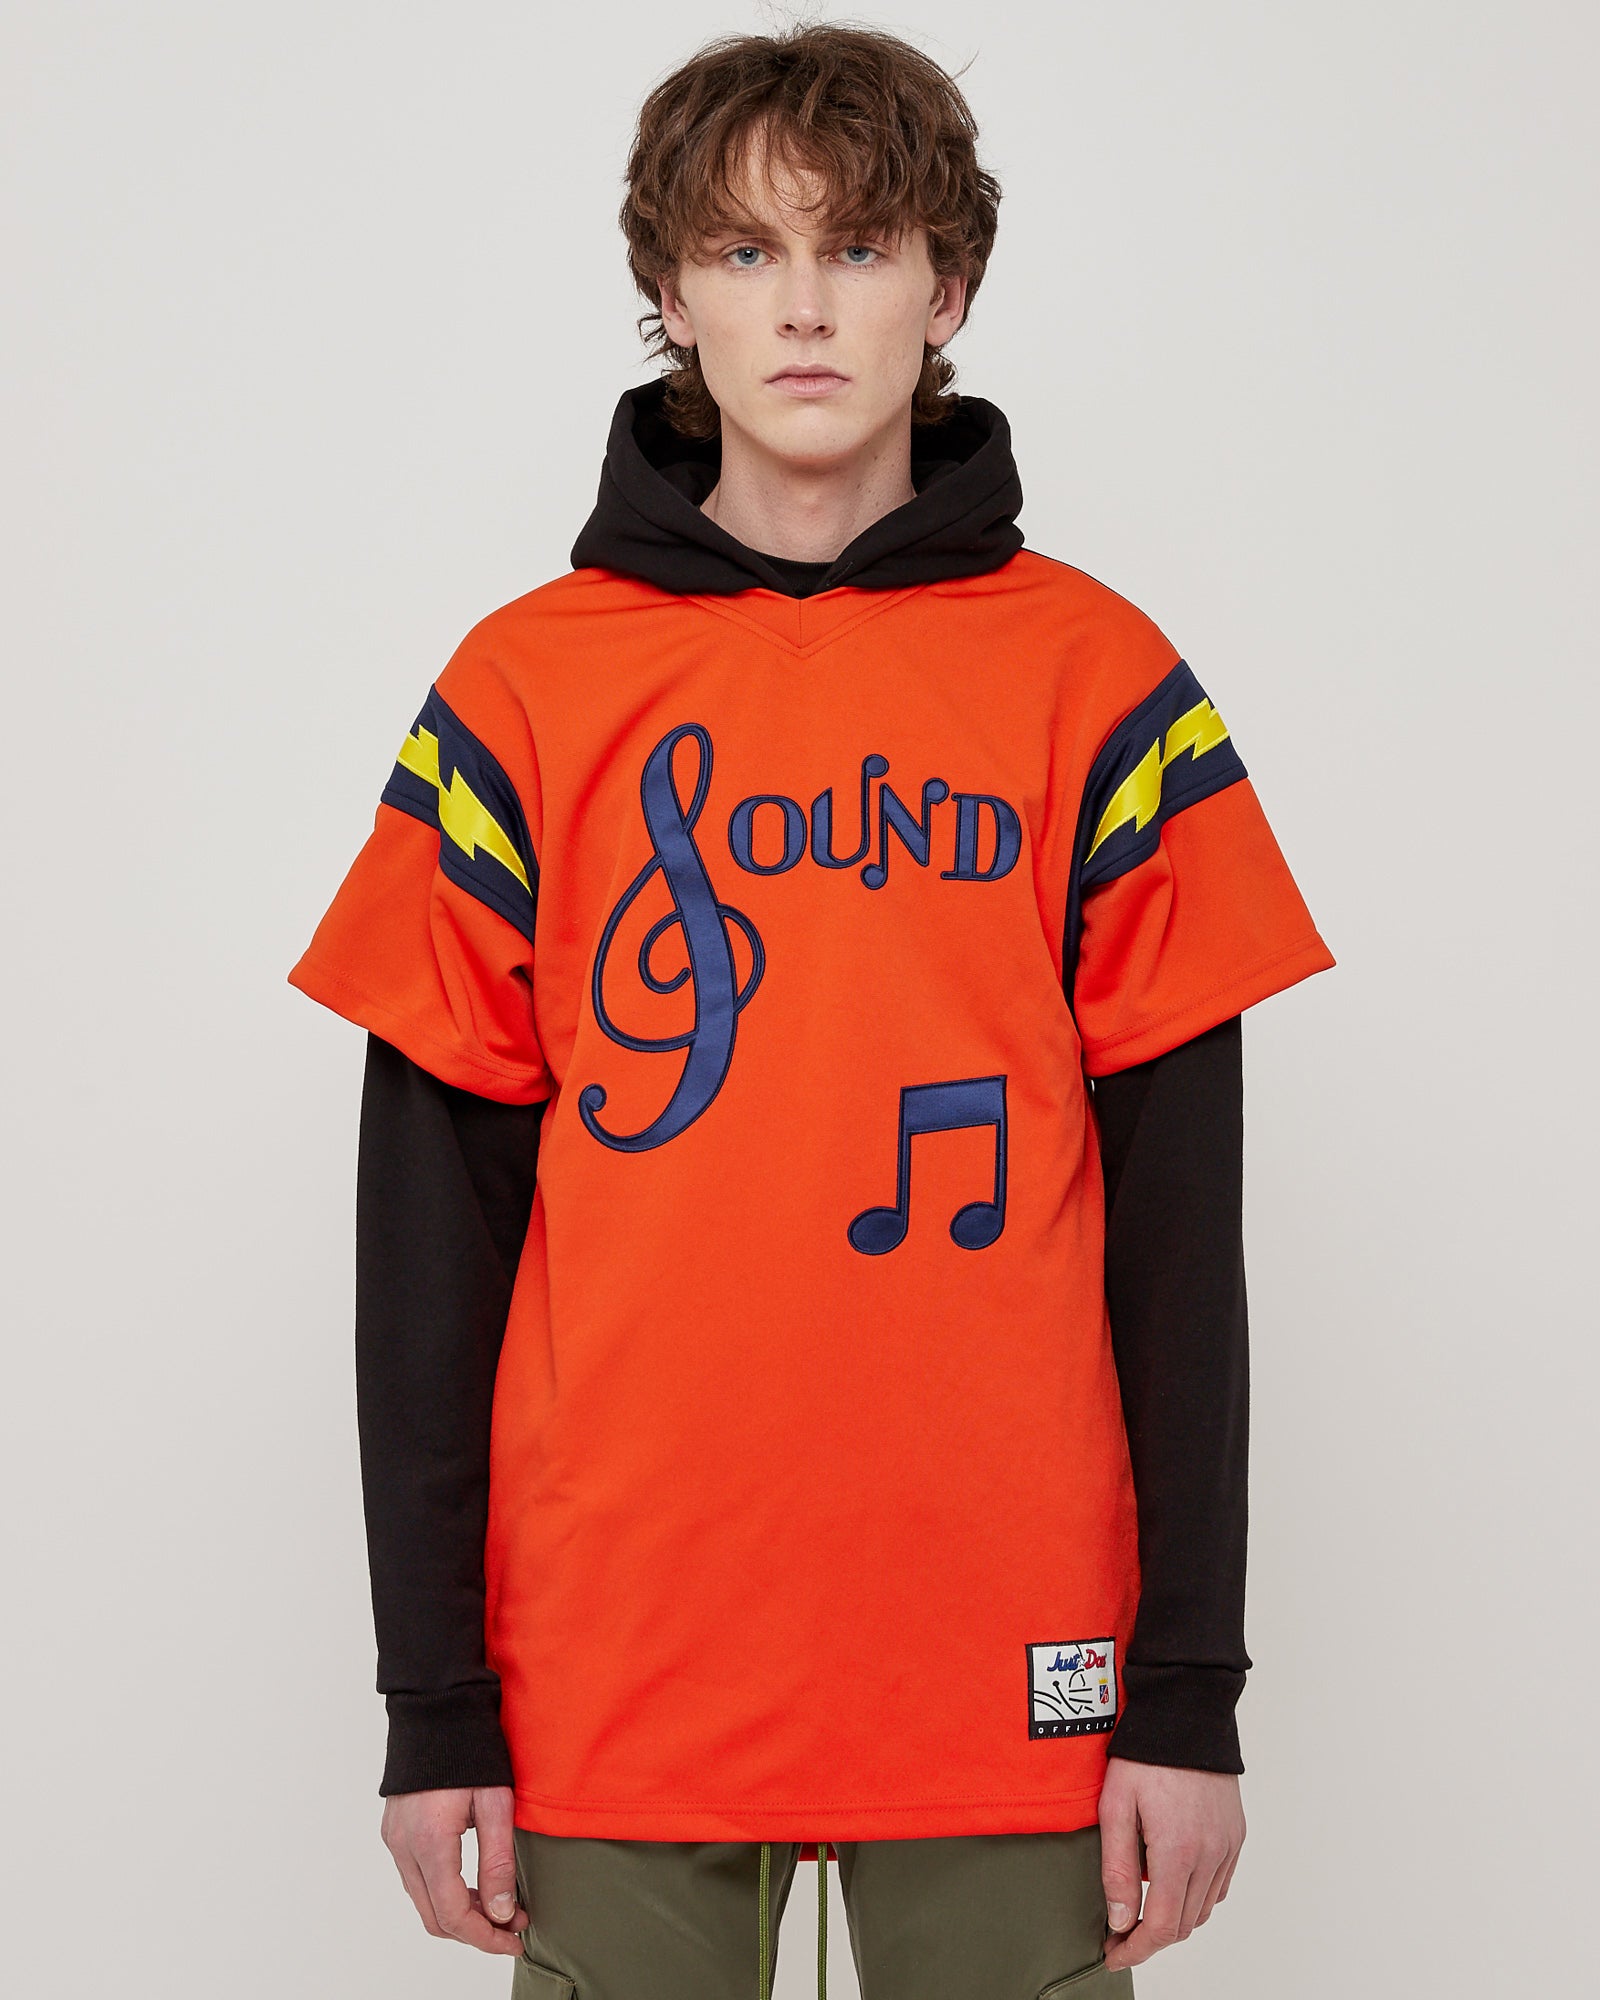 The Sound Football Jersey Hoodie in Orange